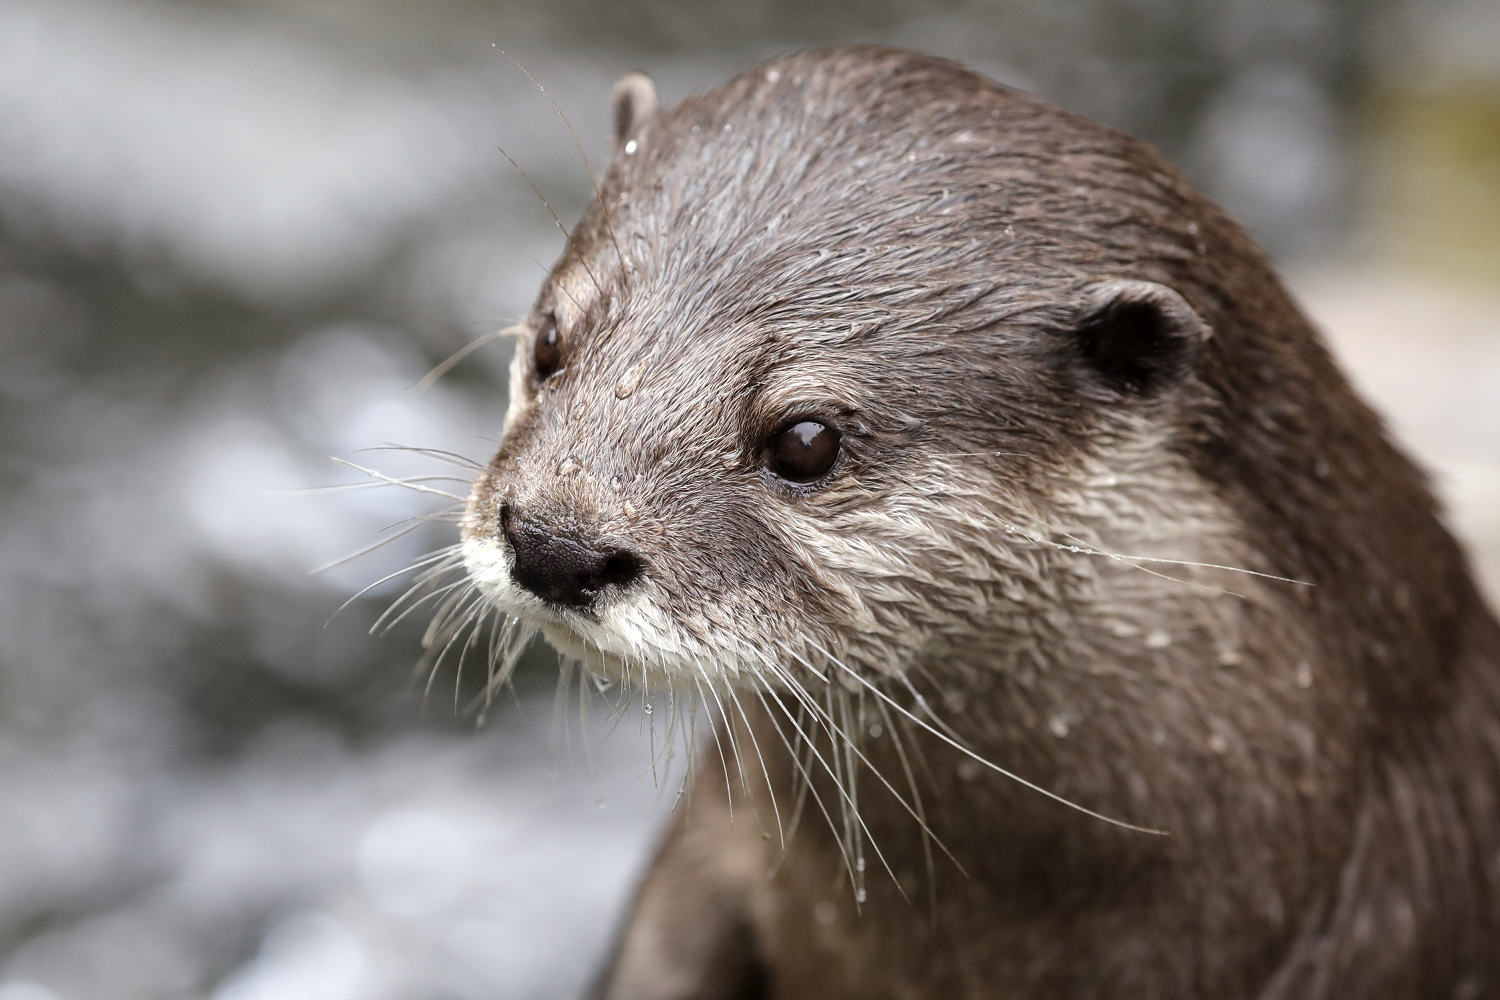 ‘They wanted to kill me’: Swimmer says otters bit him 12 times in California lake